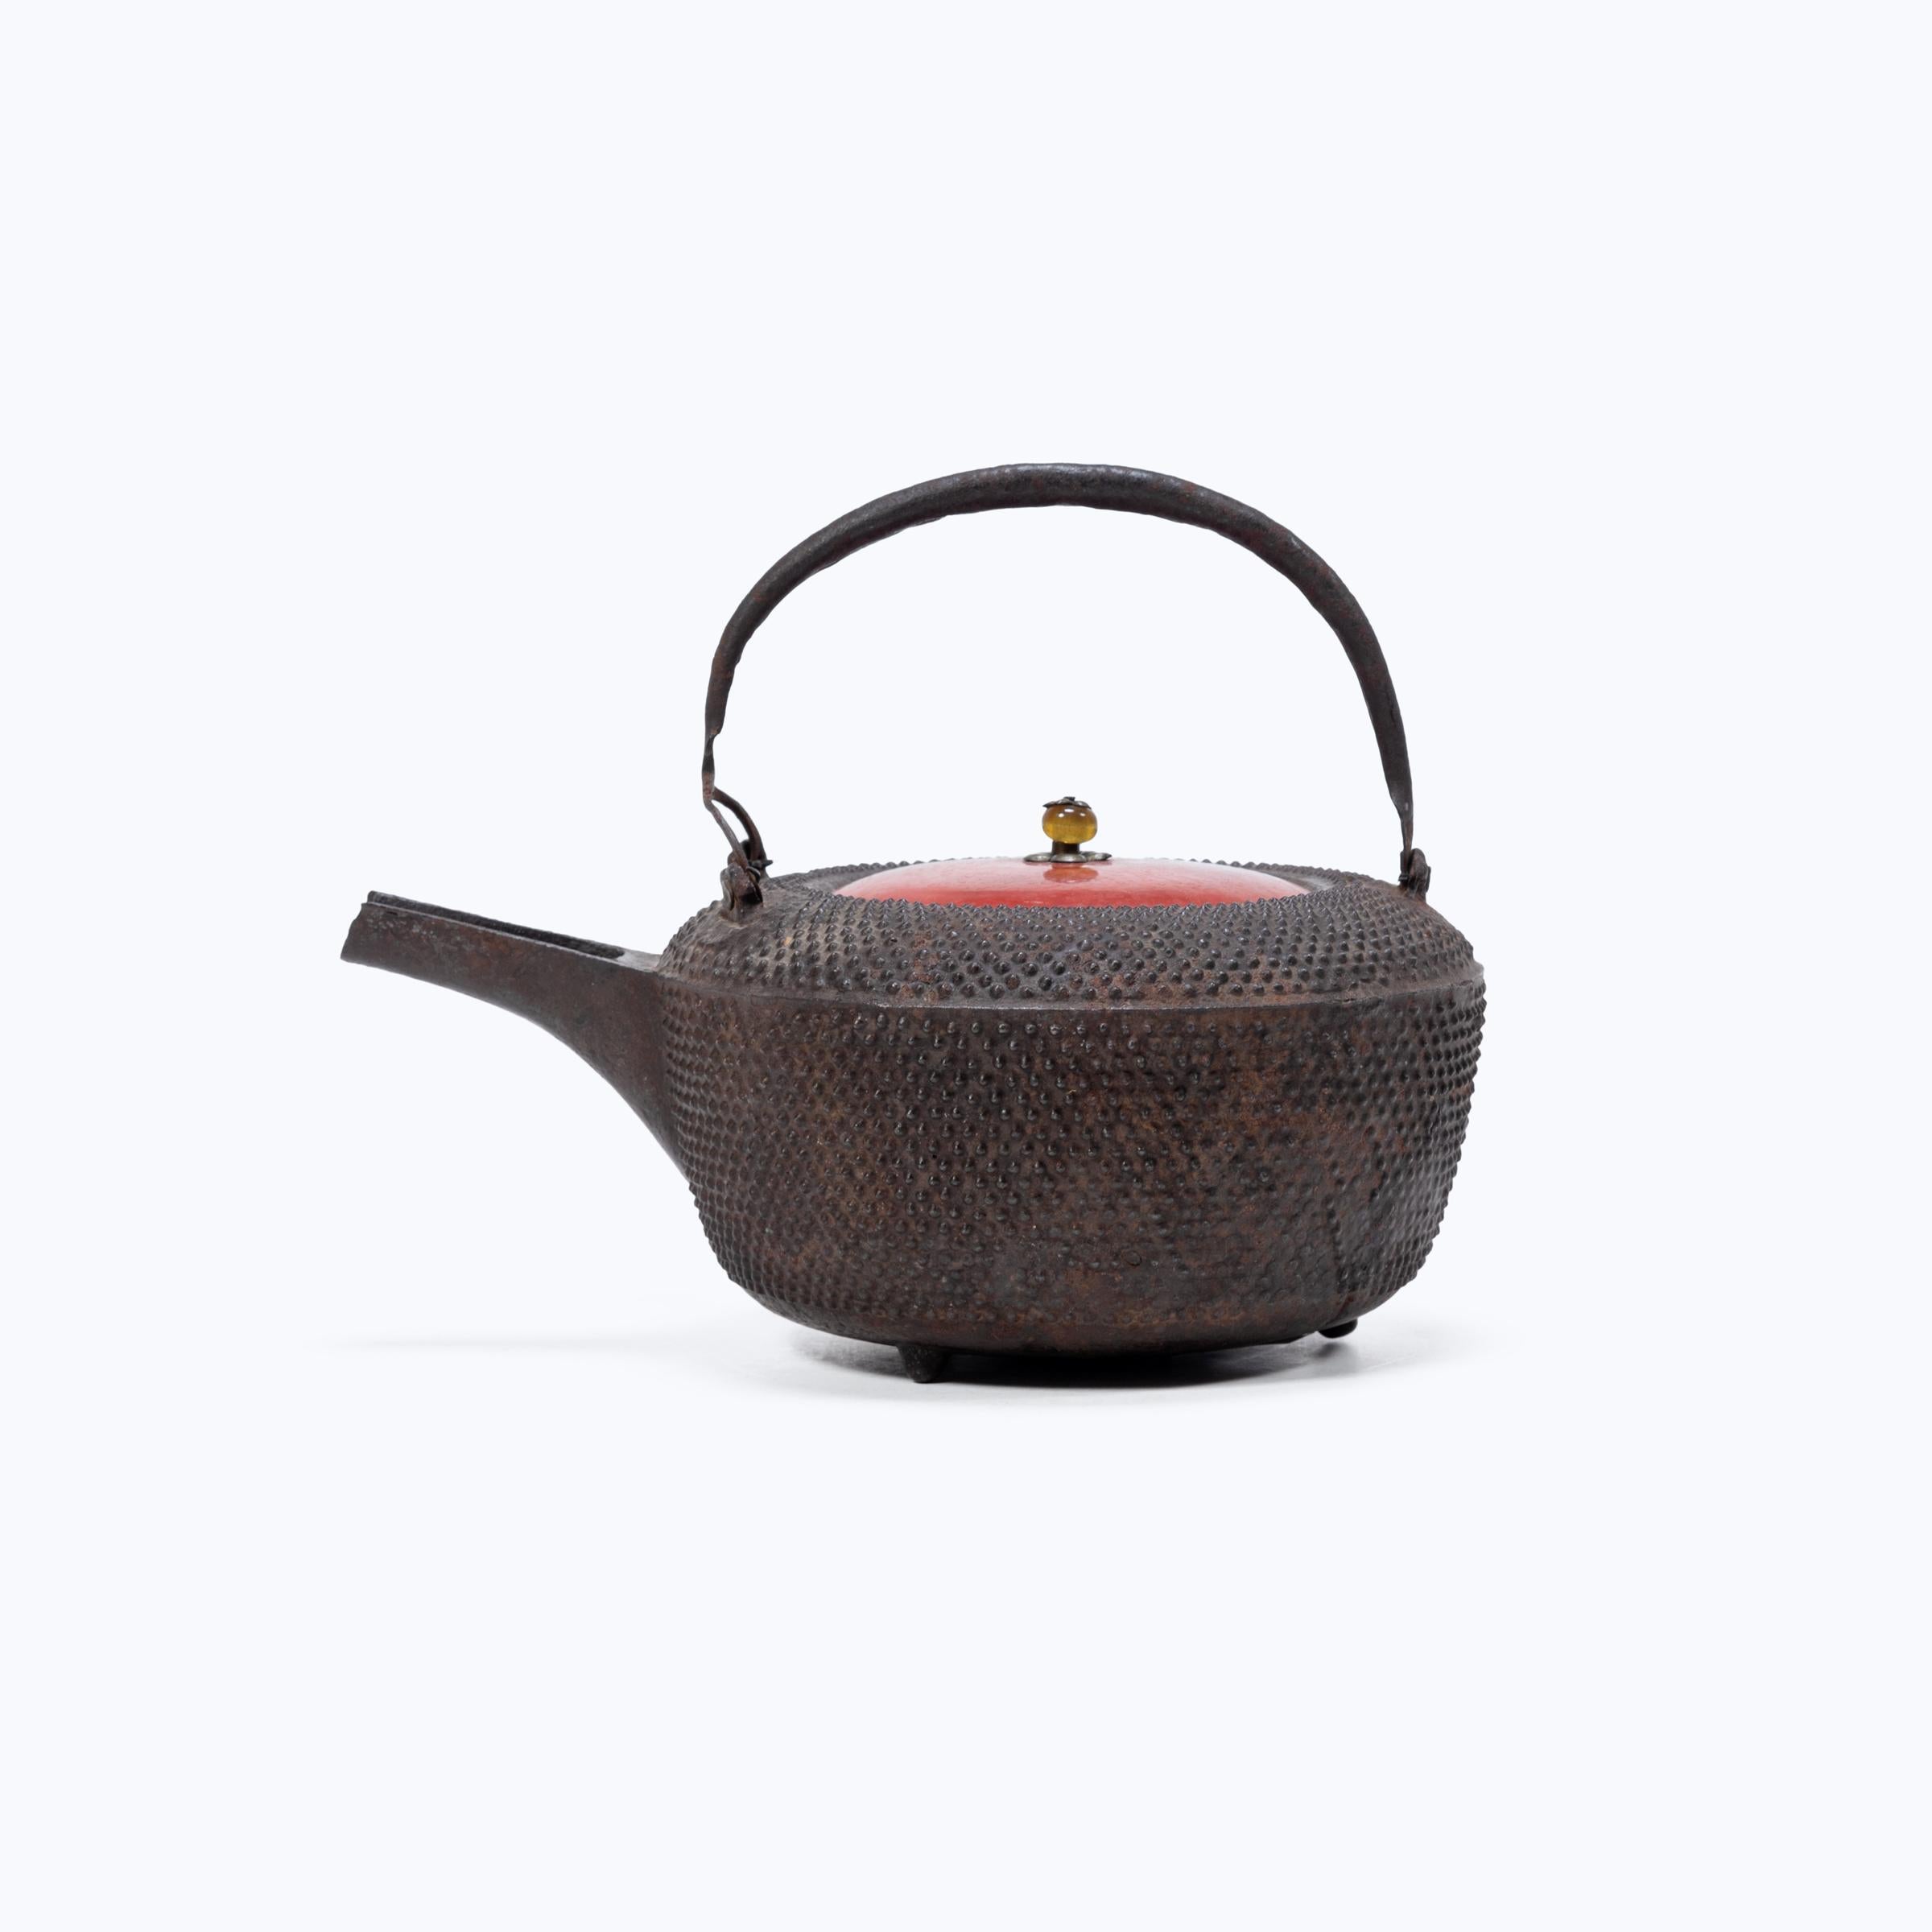 Meiji Japanese Iron Tetsubin with Red Lacquer Lid, c. 1900